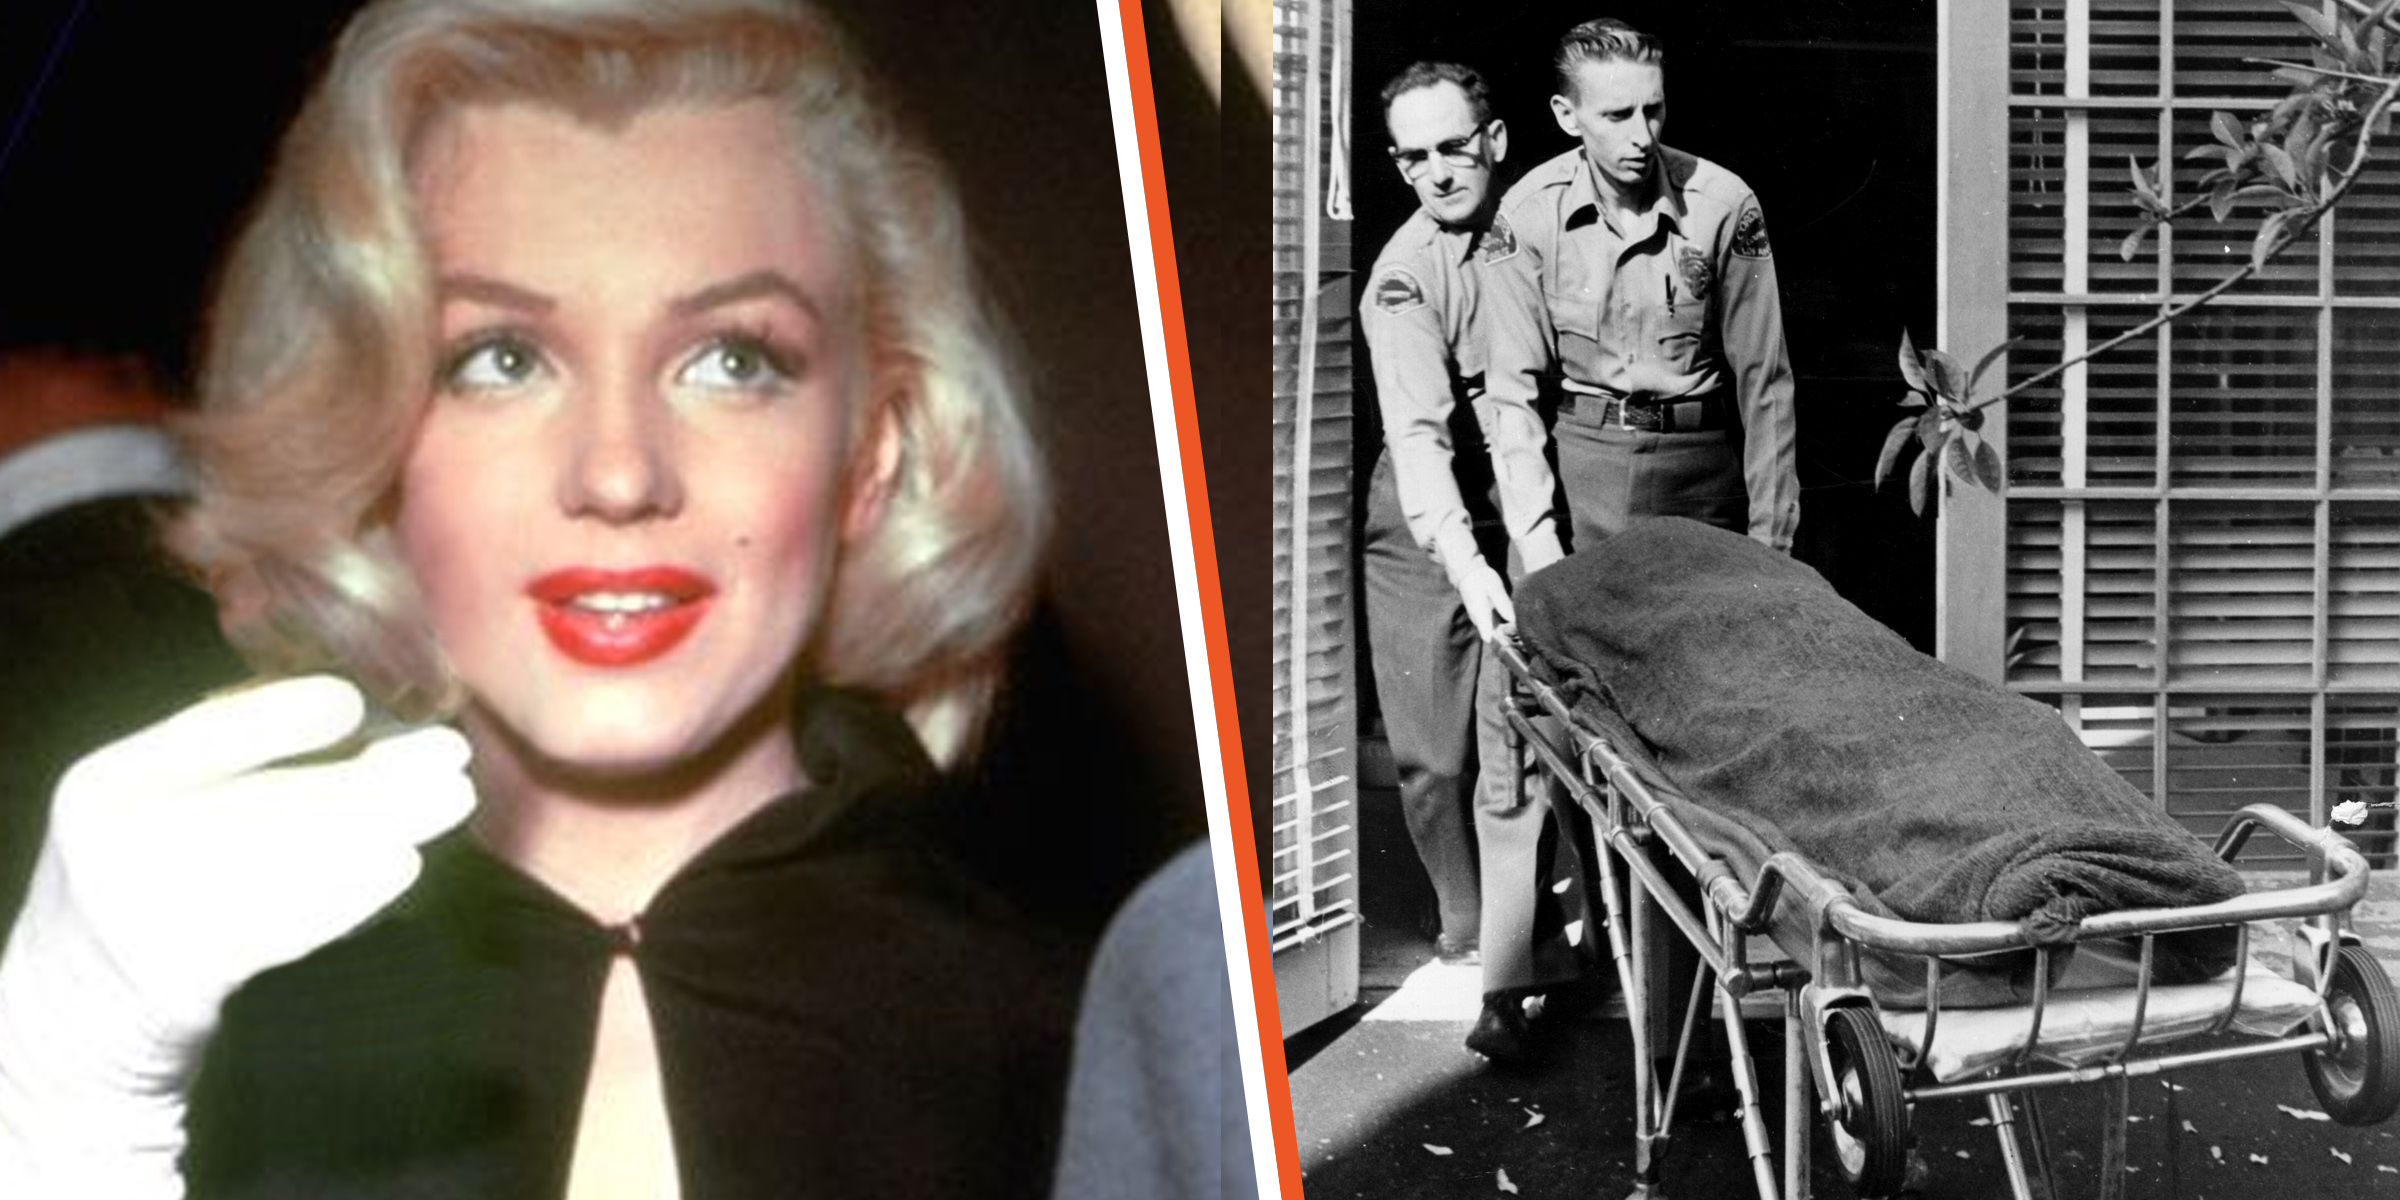 Marilyn Monroe | Police personnel carrying Marilyn Monroe's body on a stretcher. | Source: Getty Images